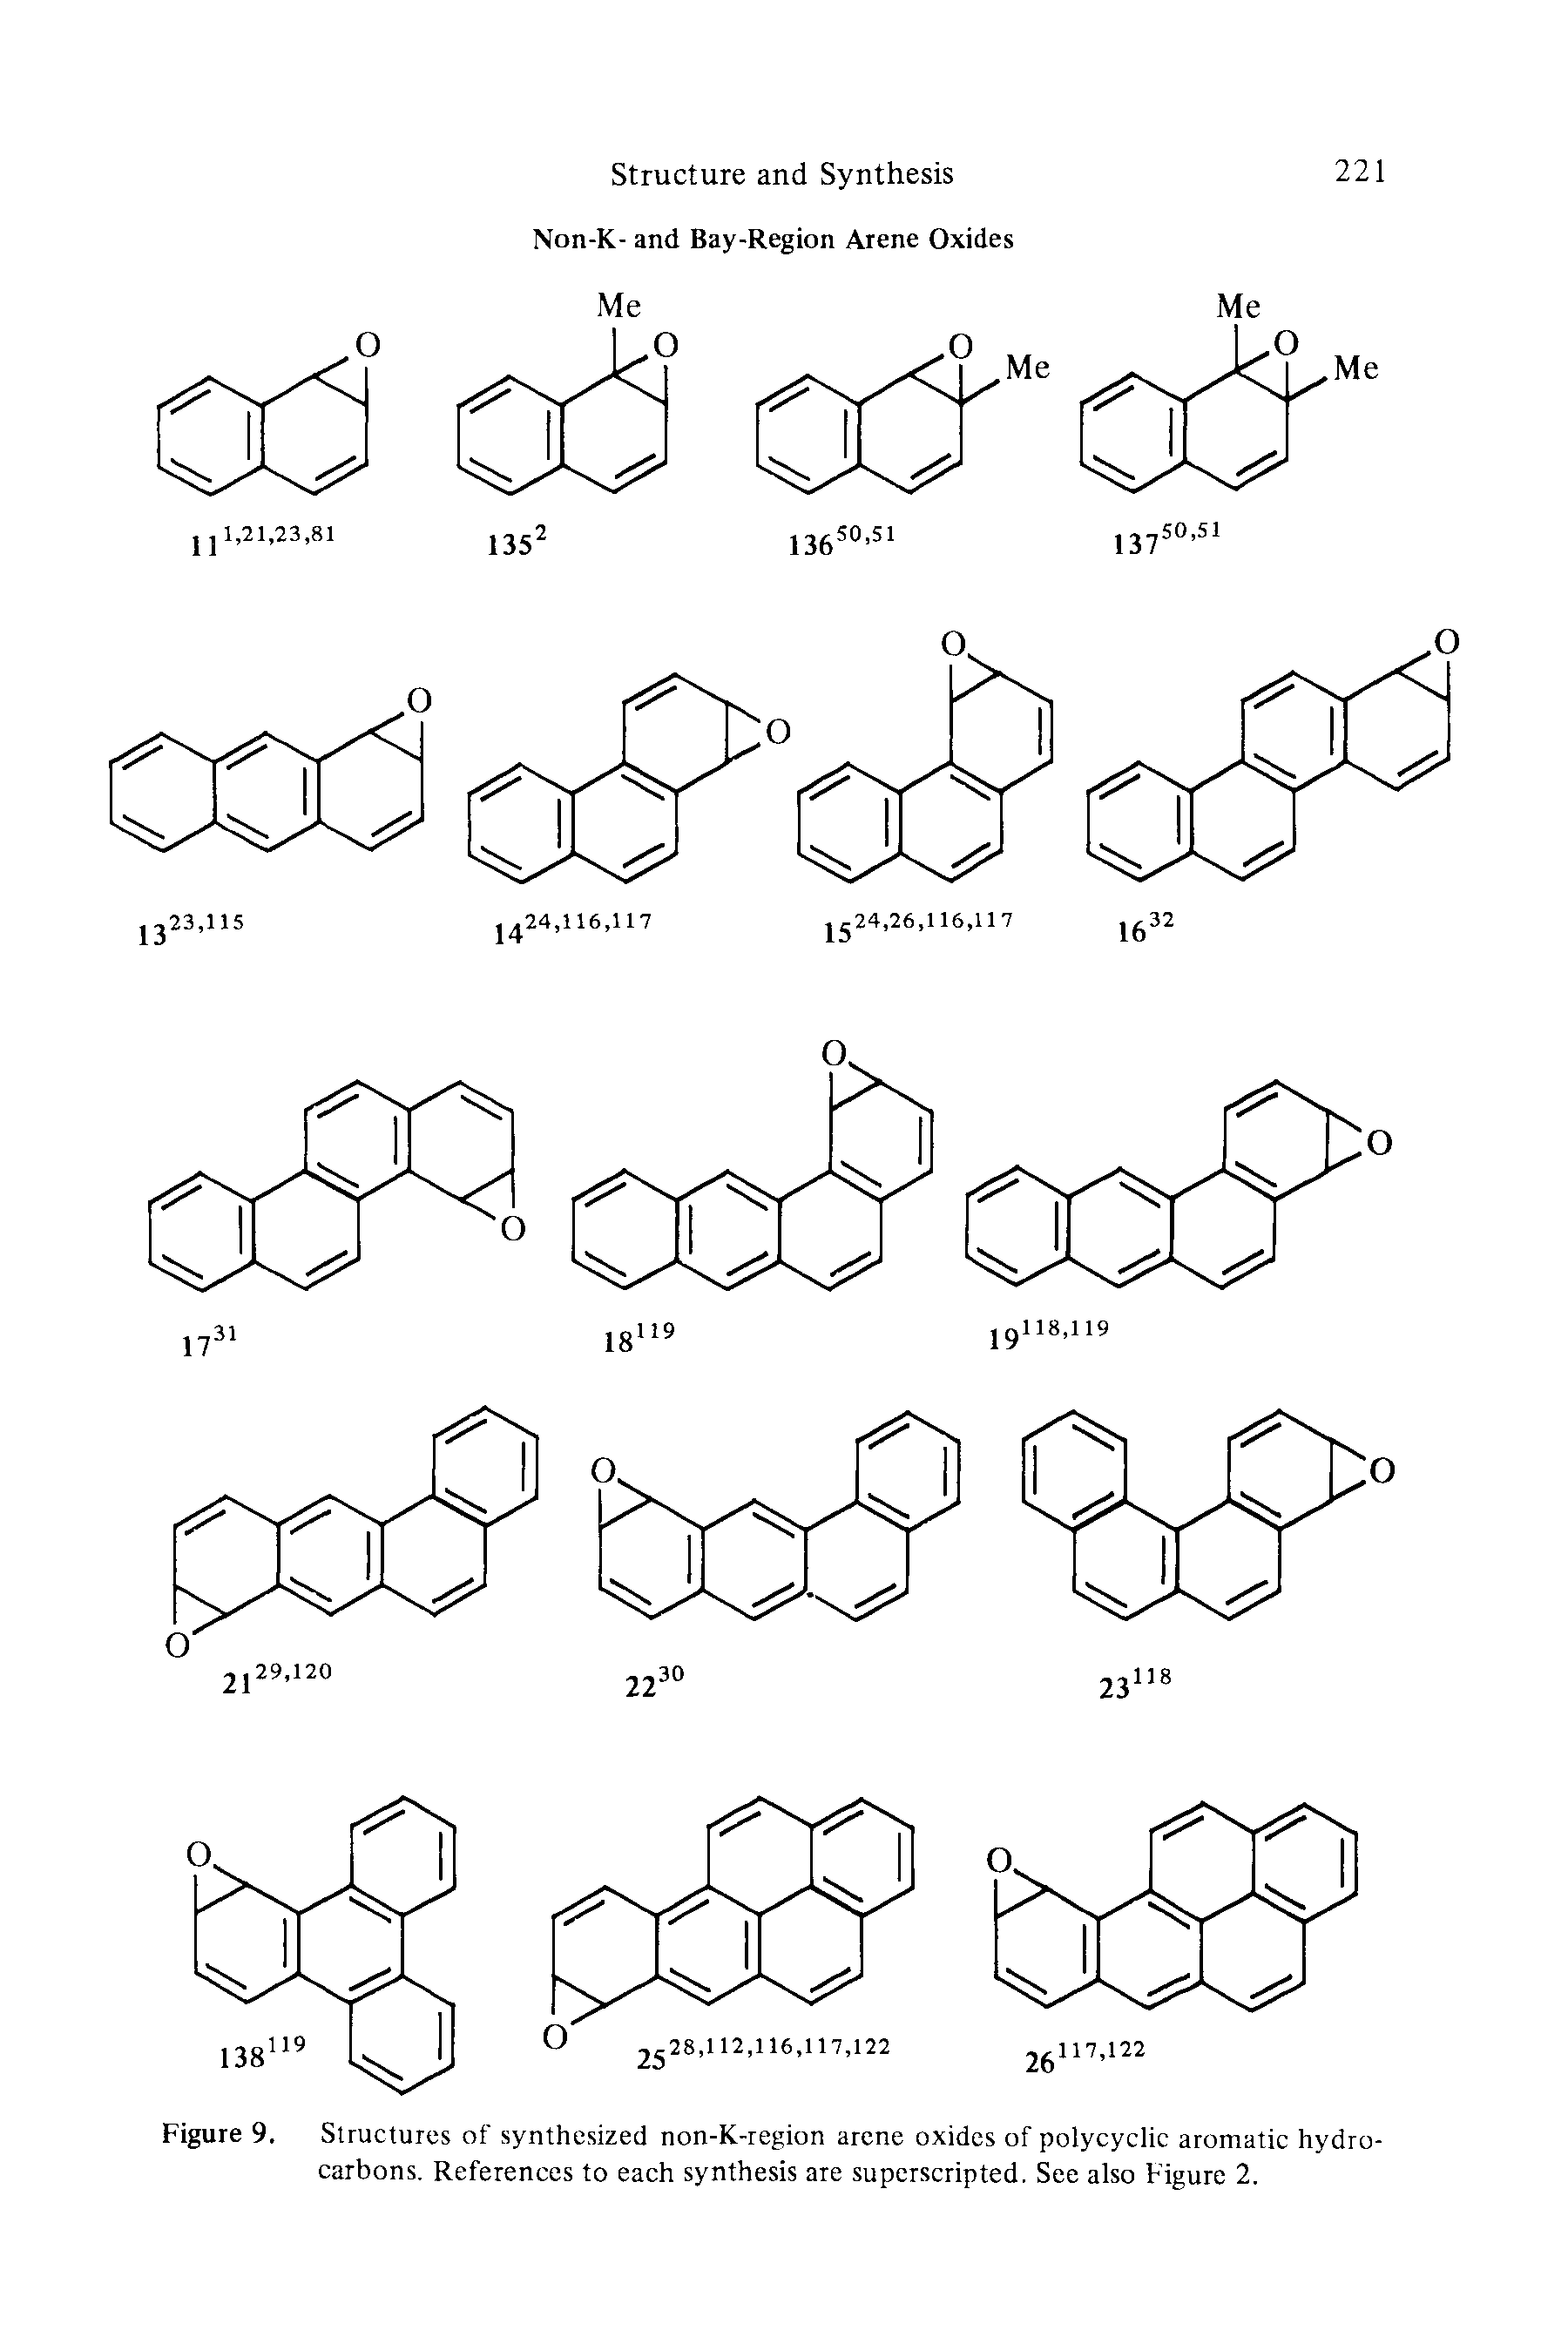 Figure 9. Structures of synthesized non-K-region arene oxides of polycyclic aromatic hydrocarbons. References to each synthesis are superscripted. See also Figure 2.